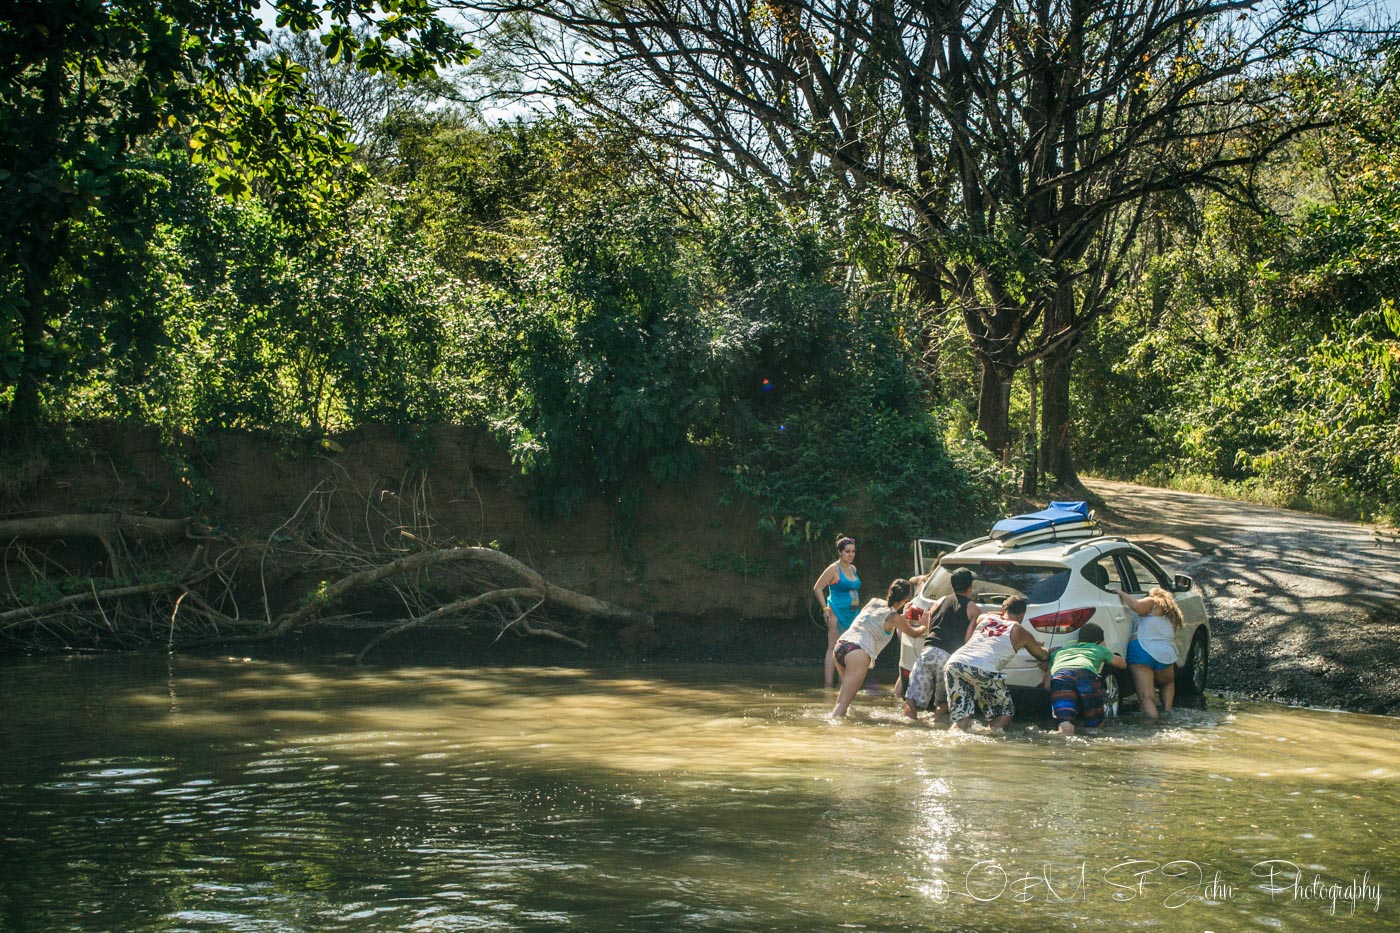 Corcovado National Park: Car stuck in a river in Costa Rica